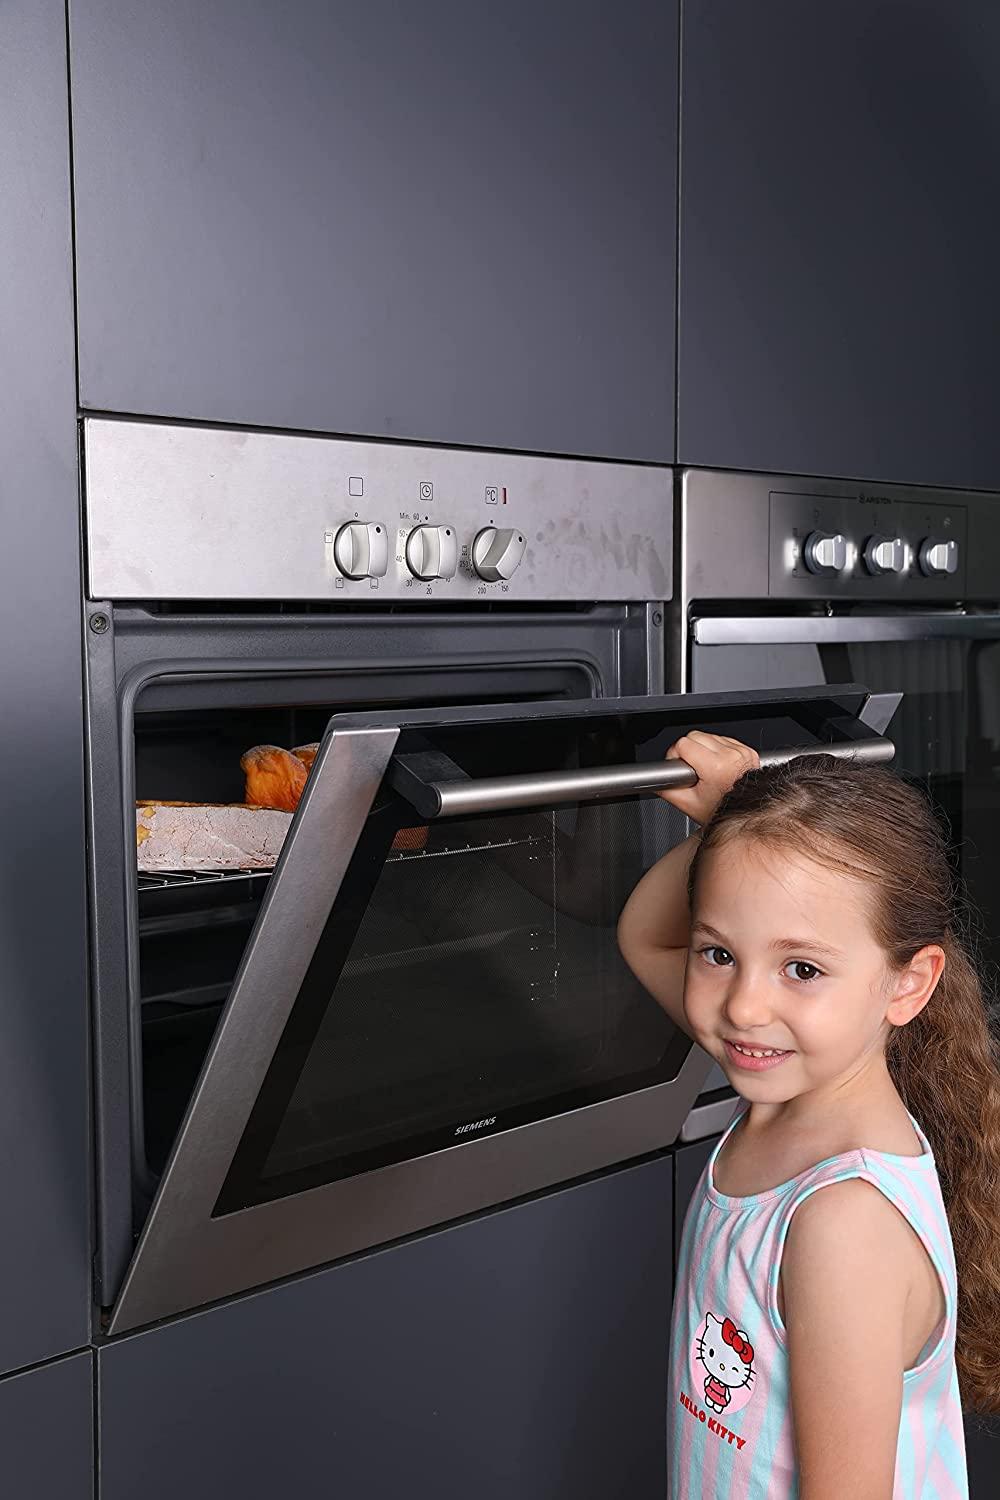 RENAISSANT 1 Pack-Oven Lock Child Safety Heat-Resistant Baby Proof